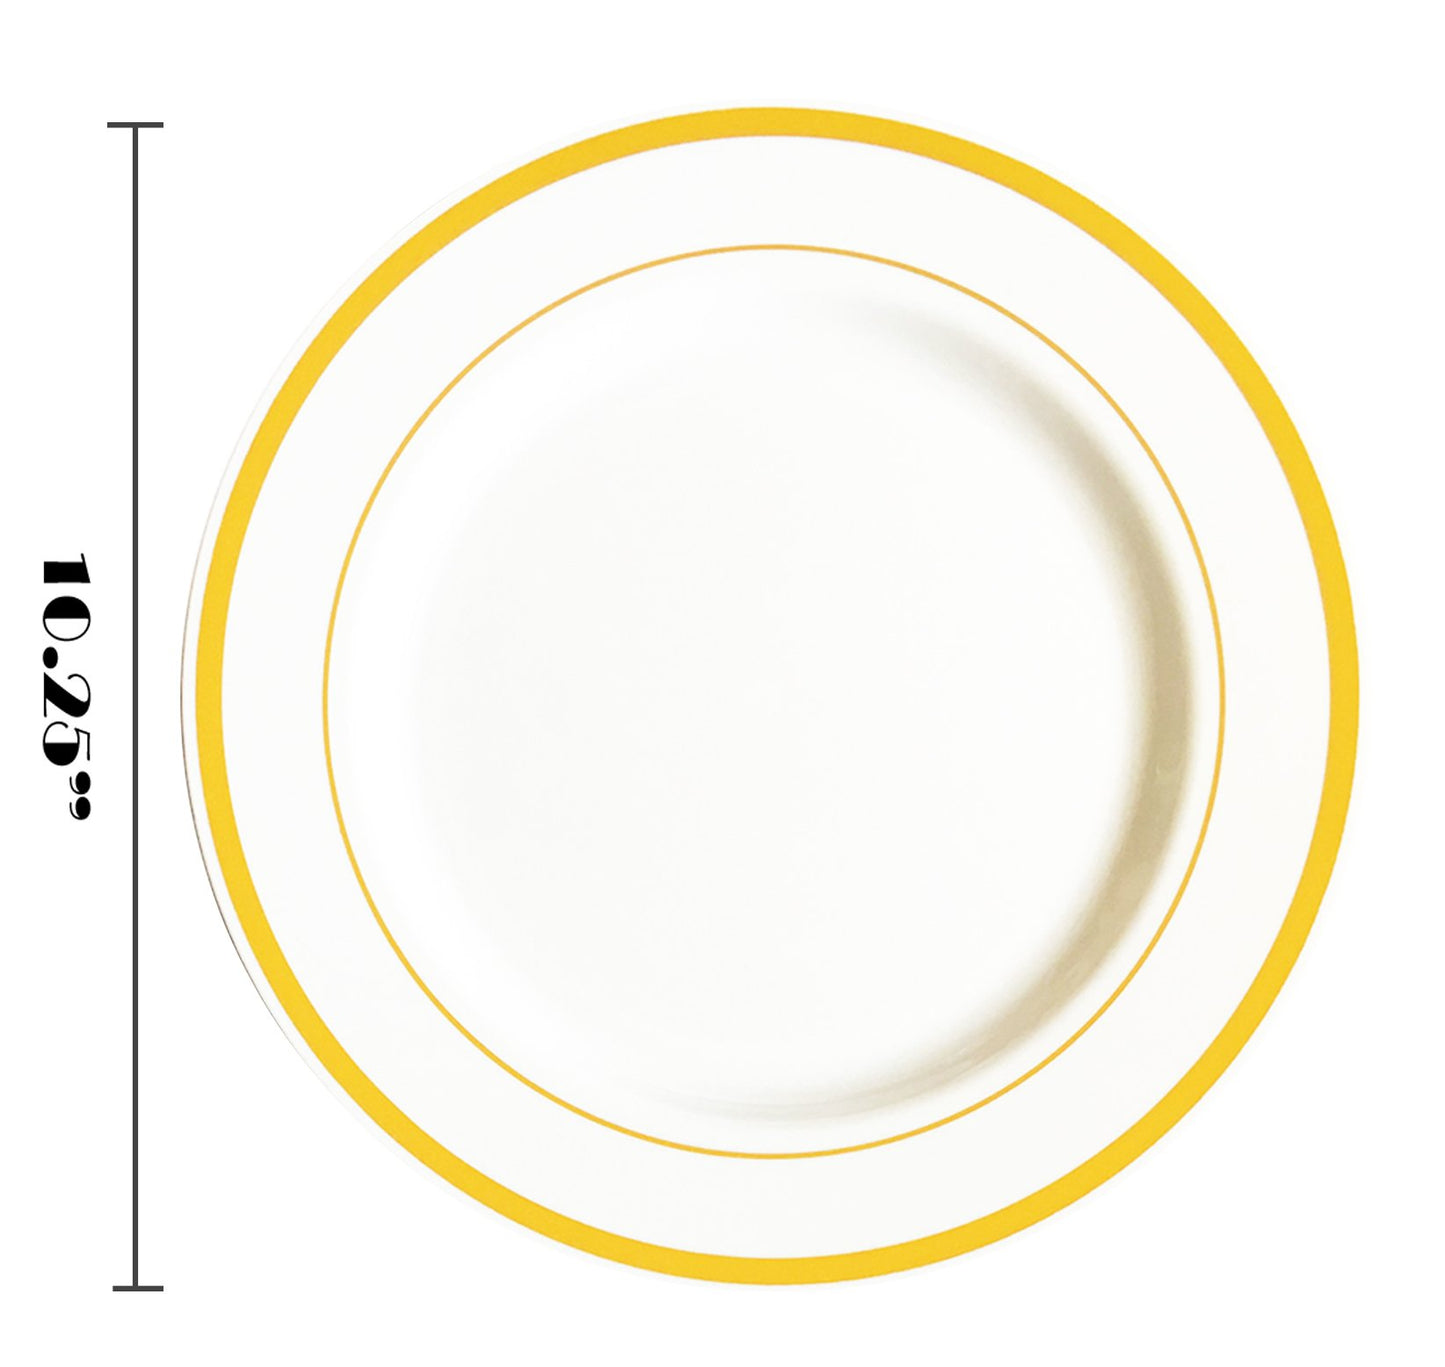 JL Prime 25 Piece 10 Inch Gold Plastic Dinner Plates Bulk Set, Heavy Duty Reusable Disposable Plastic Plates with Gold Rim for Party and Wedding